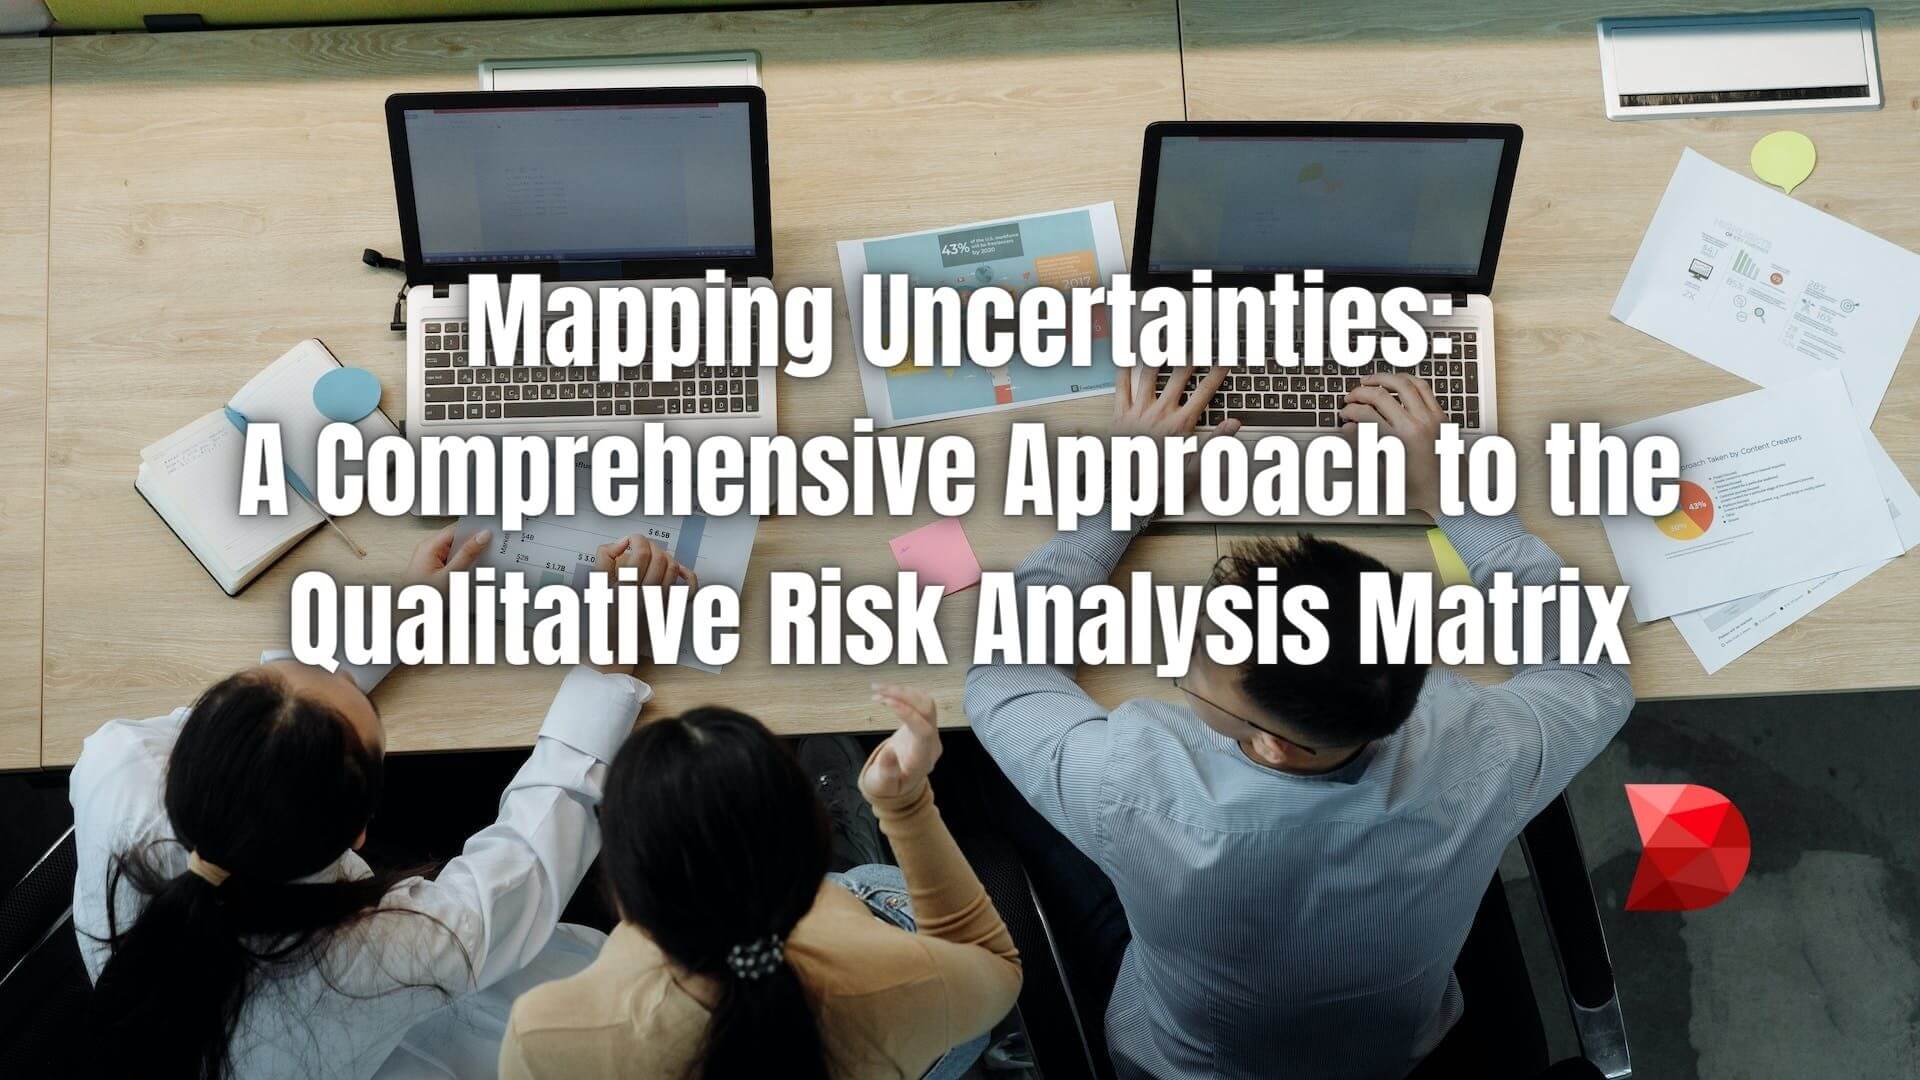 A qualitative risk analysis matrix is an instrument that enables teams to anticipate and respond to potential risks proficiently. Learn more!